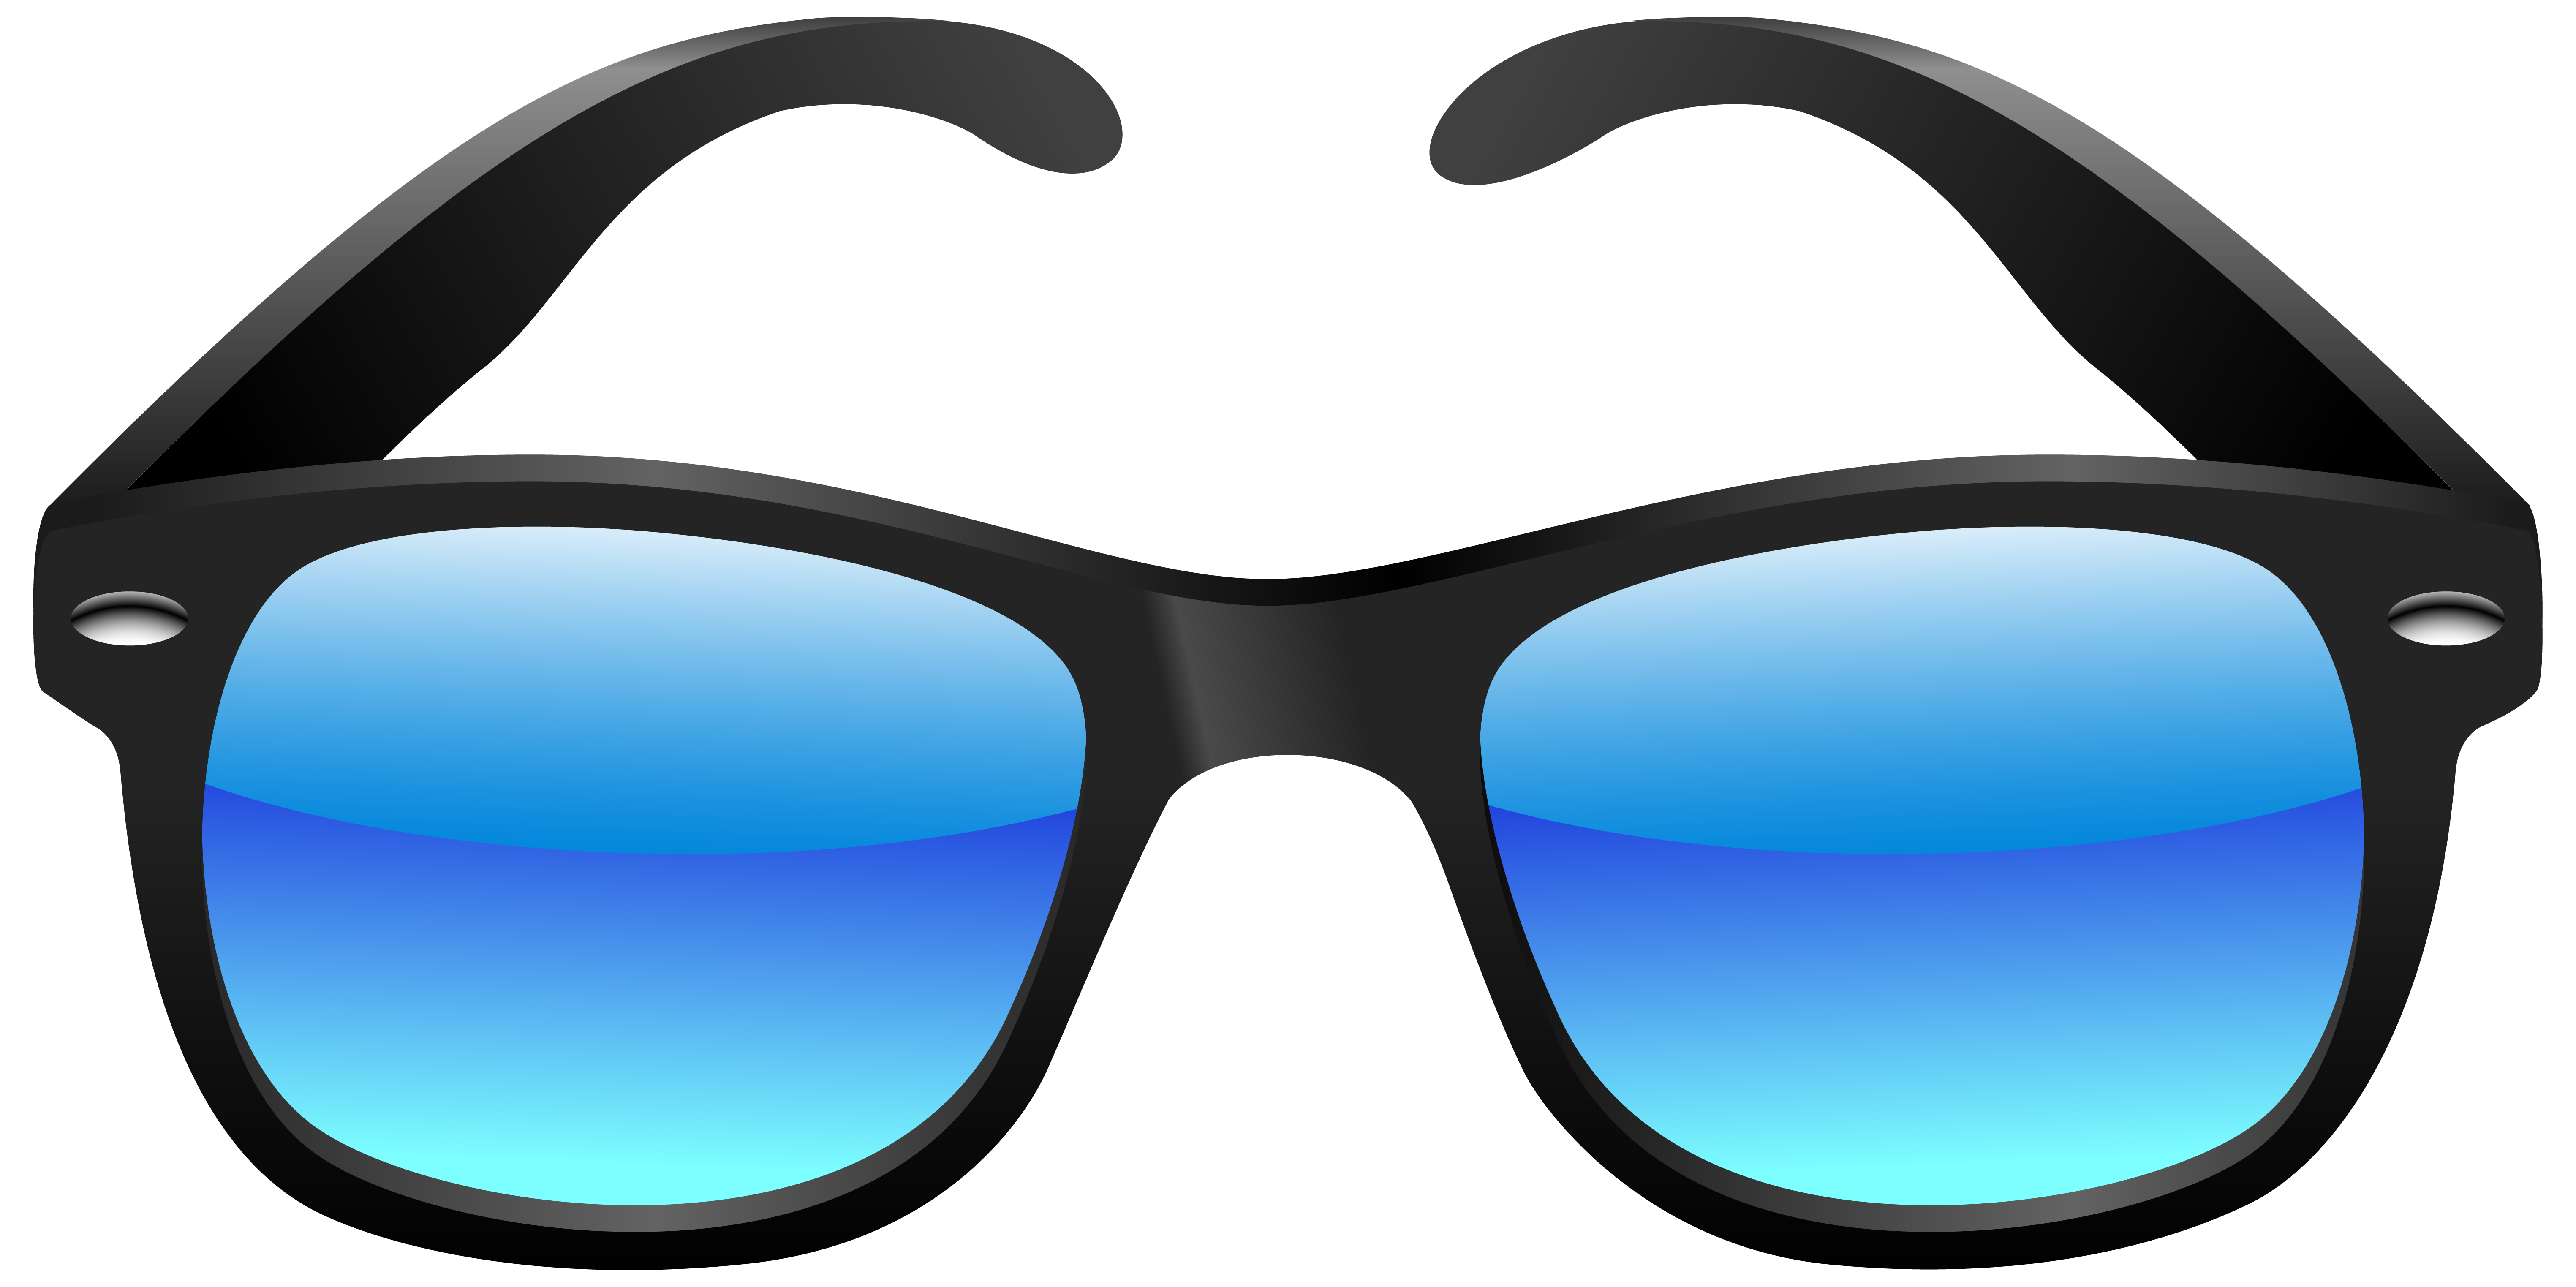 Sunglasses for women png. Goggles clipart sunglass